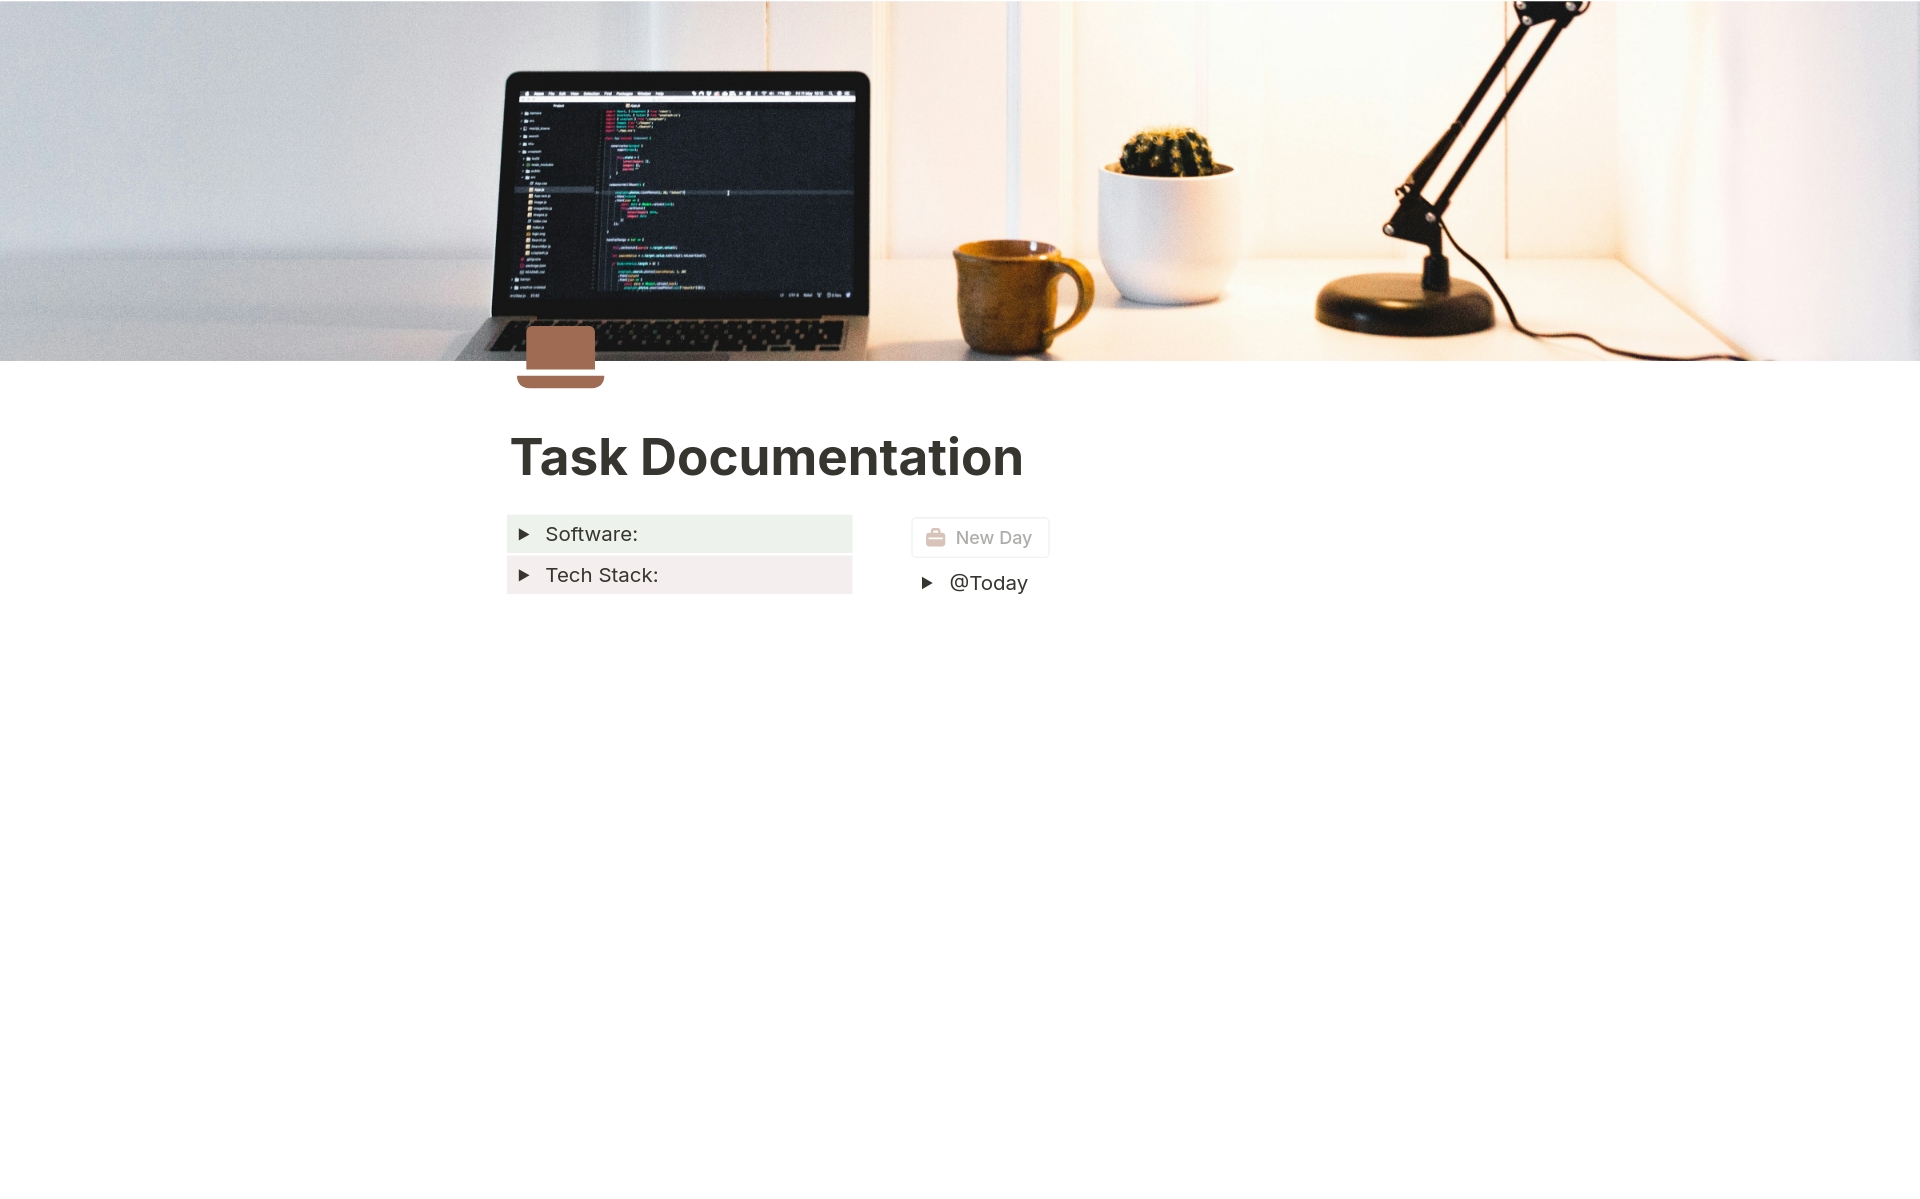 It's a task documentation template to help you organize yourself to what you did on that day.